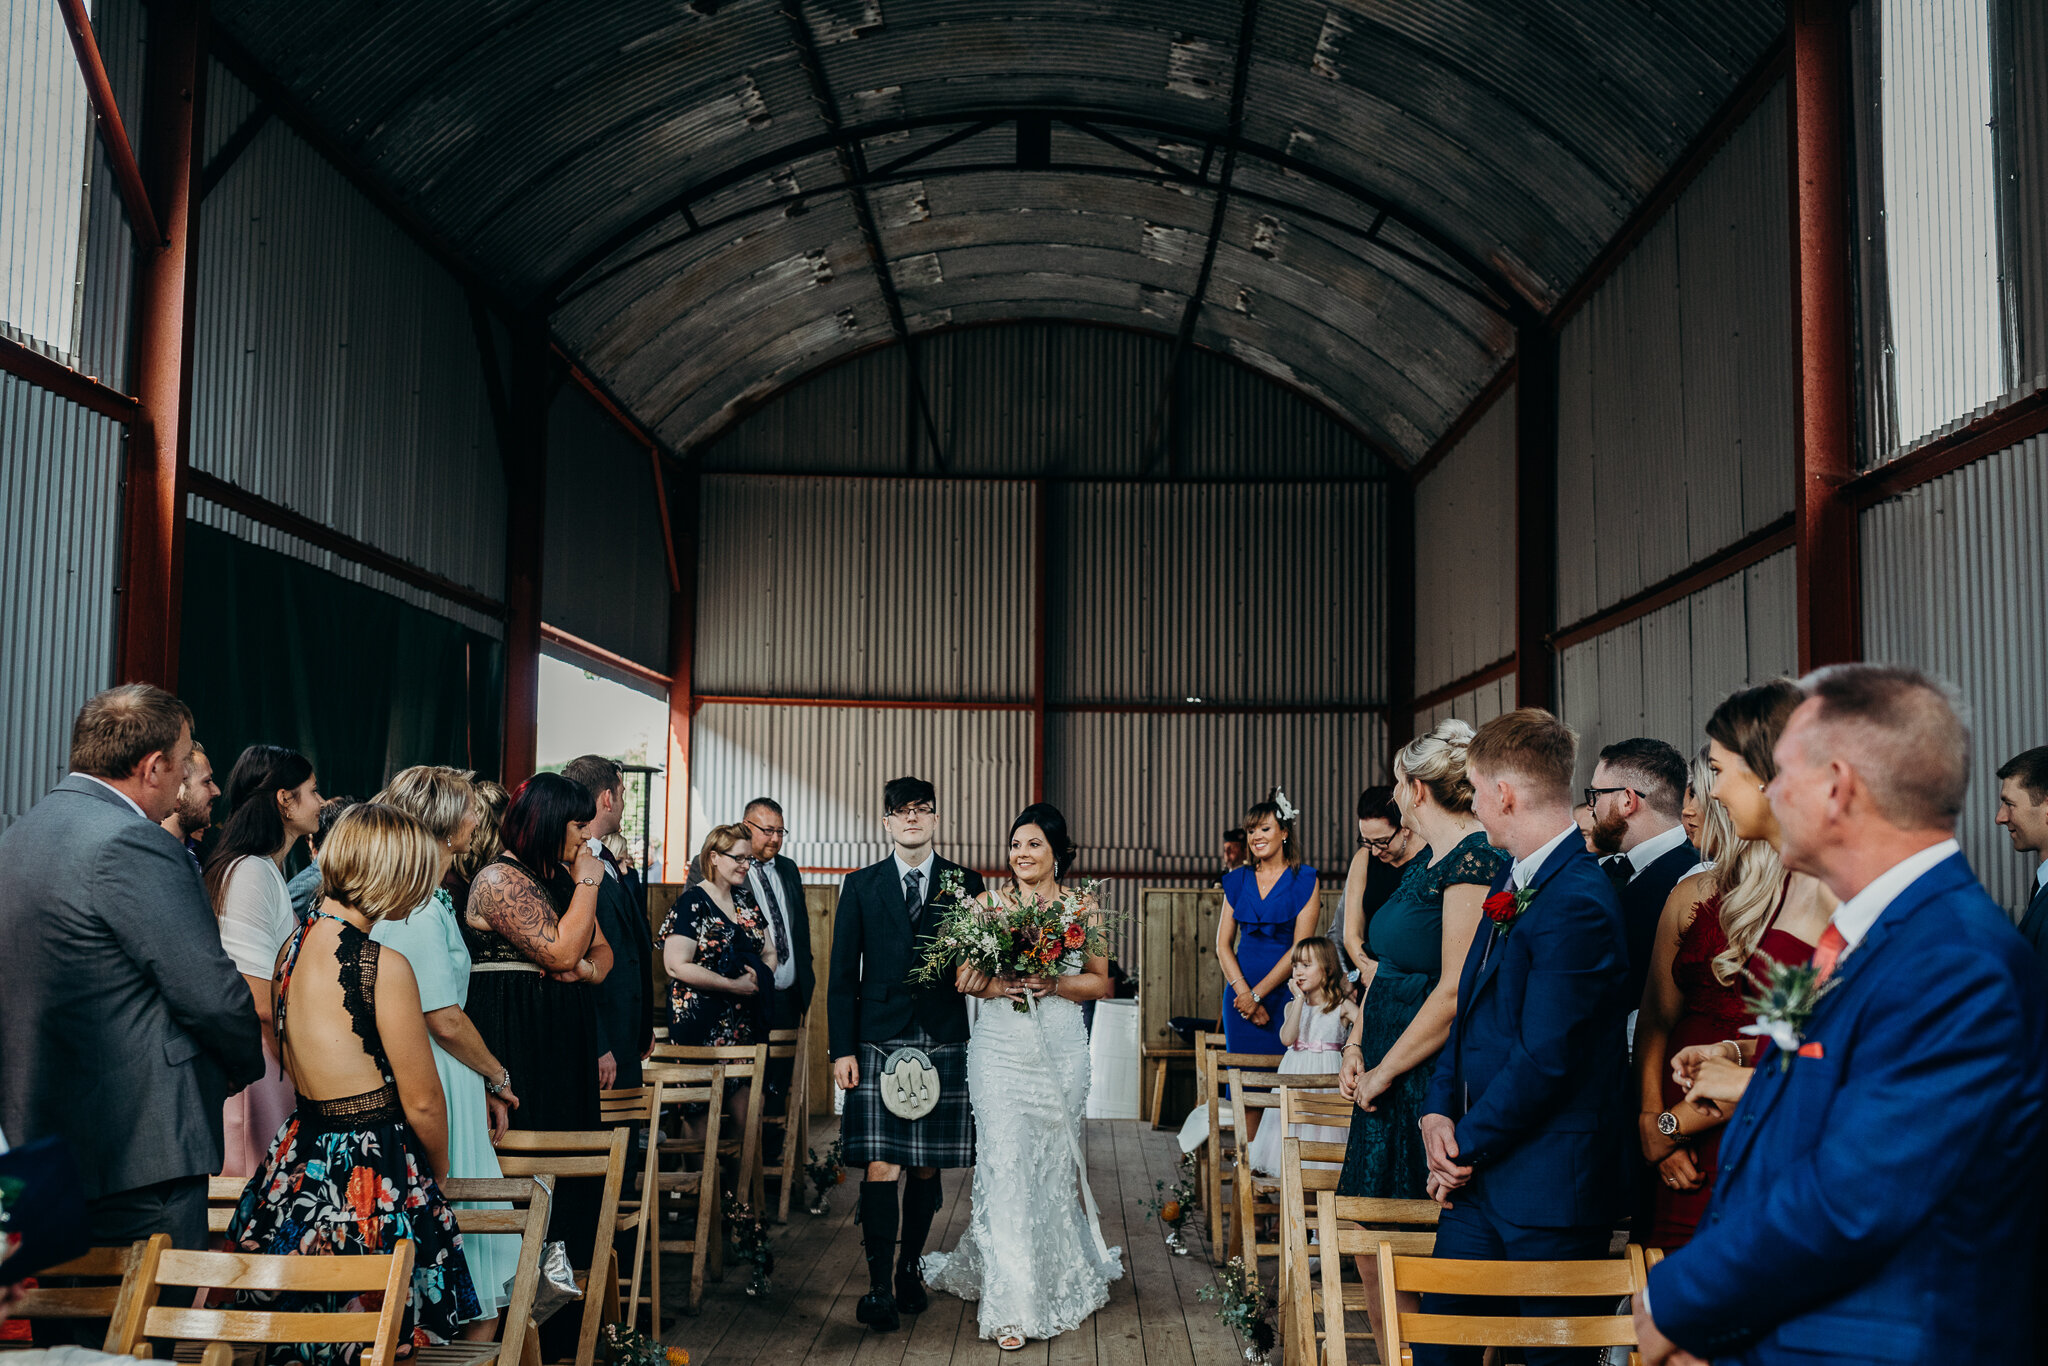 bride walking down the aisle during ceremony outdoors in barn at dalduff farm photographed by wedding photographer ayrshire scotland